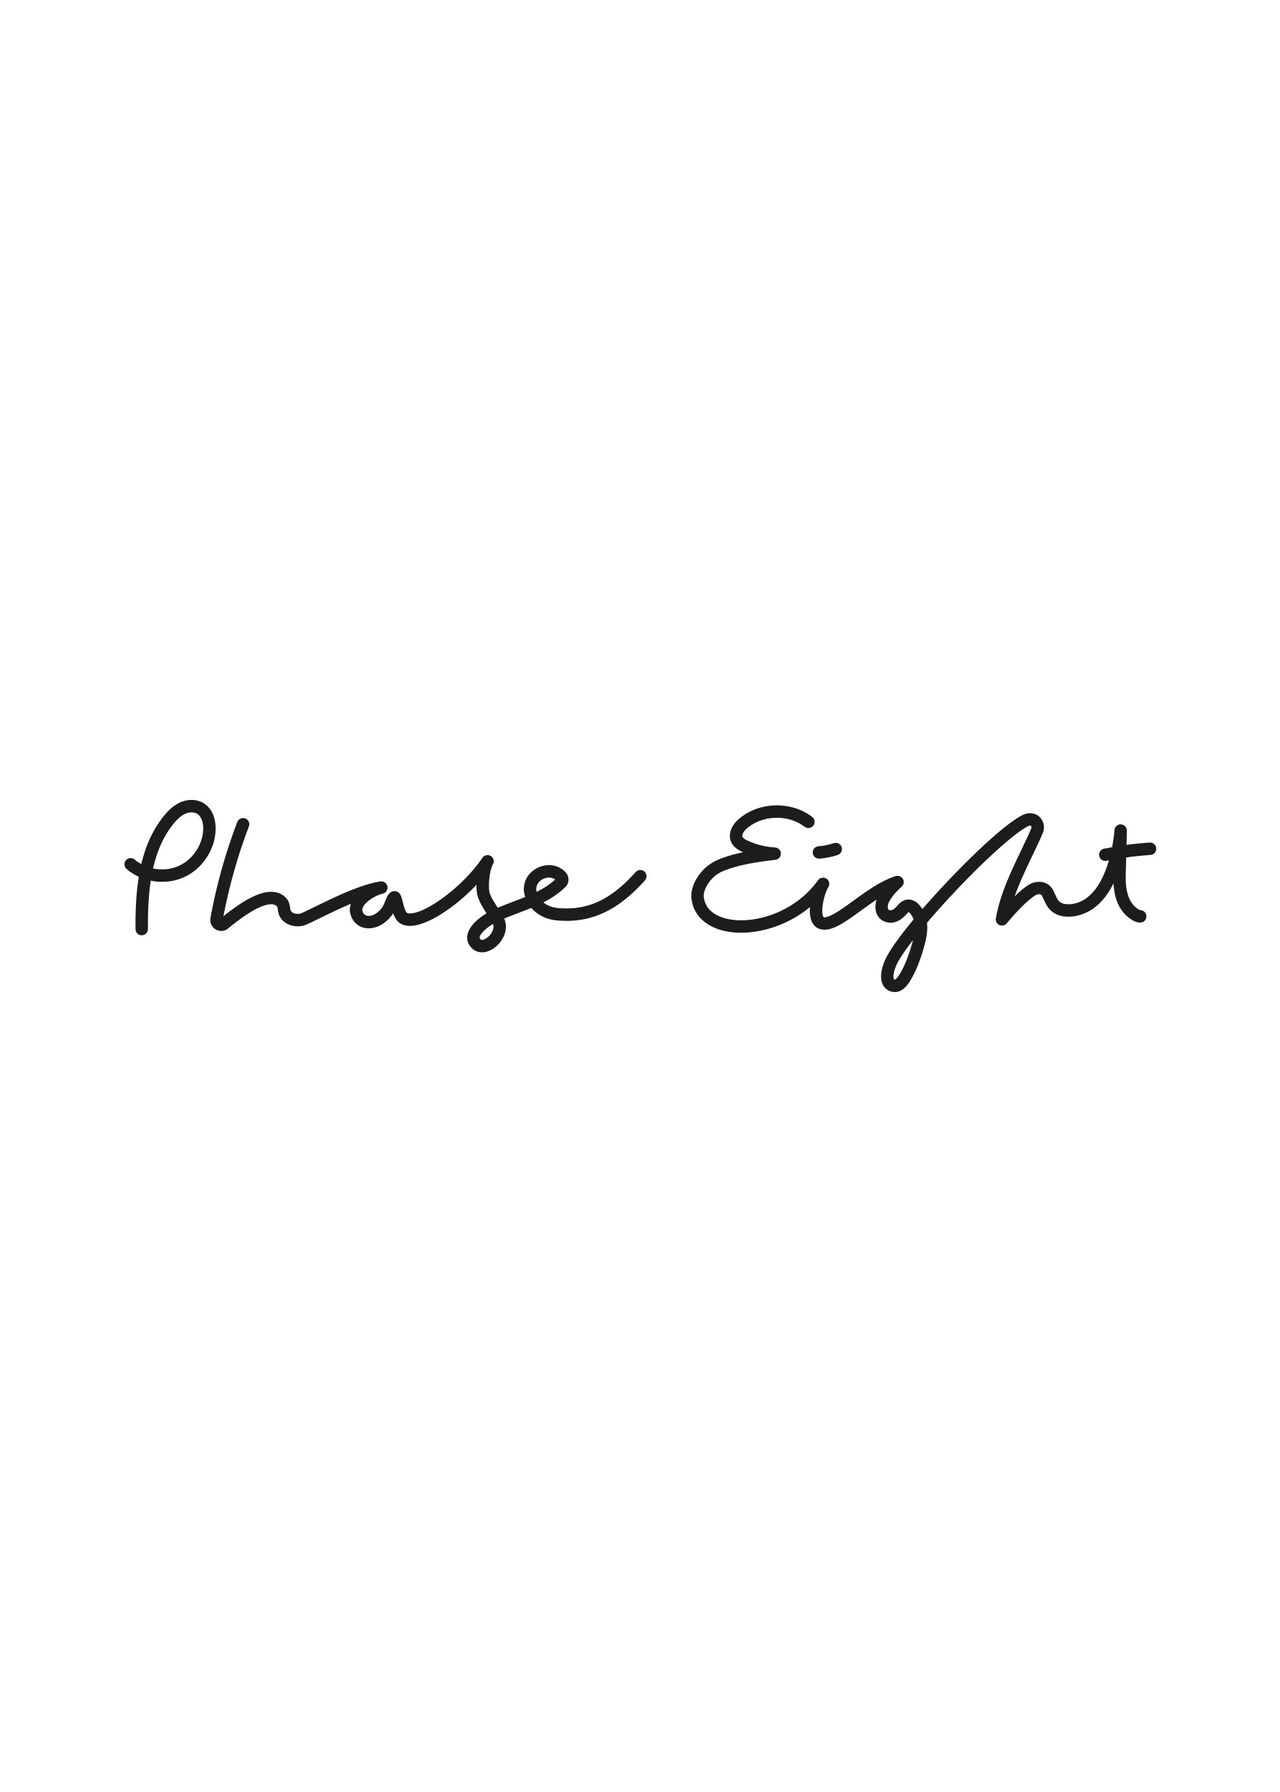 Thank you for shopping at Phase Eight Lausanne